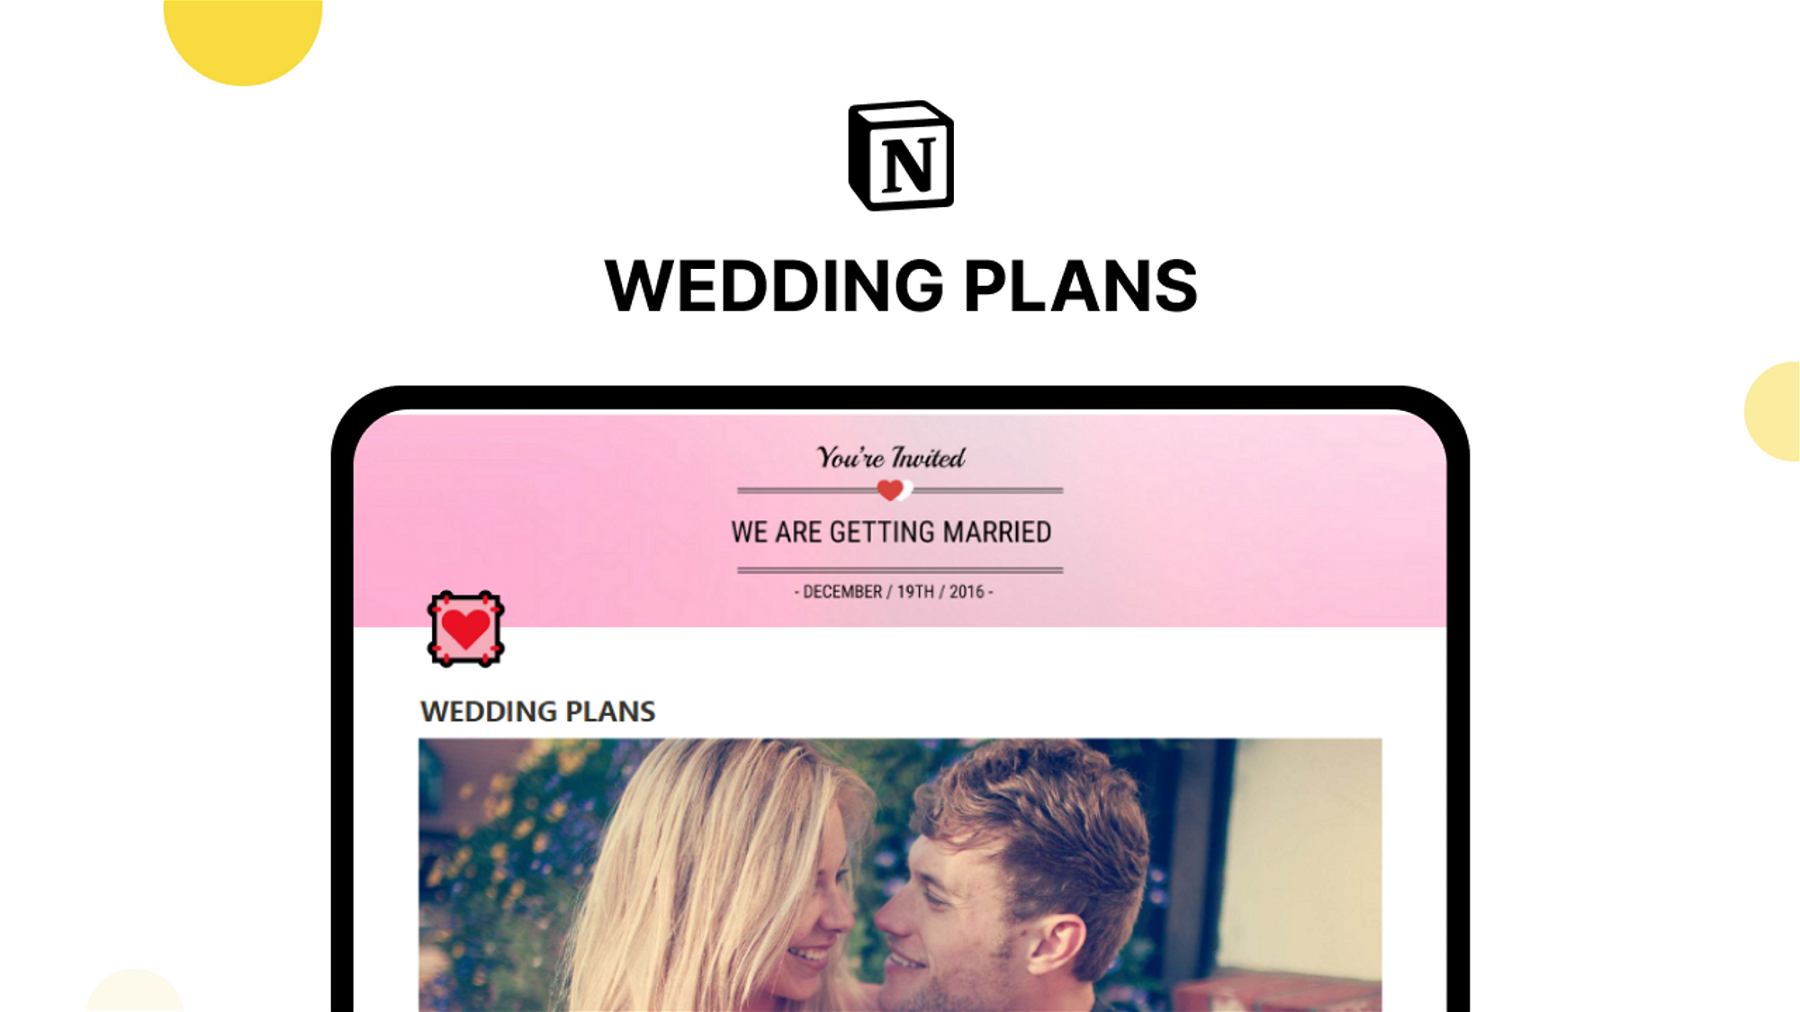 Wedding Plans - Your Love Story, Your Dream Day